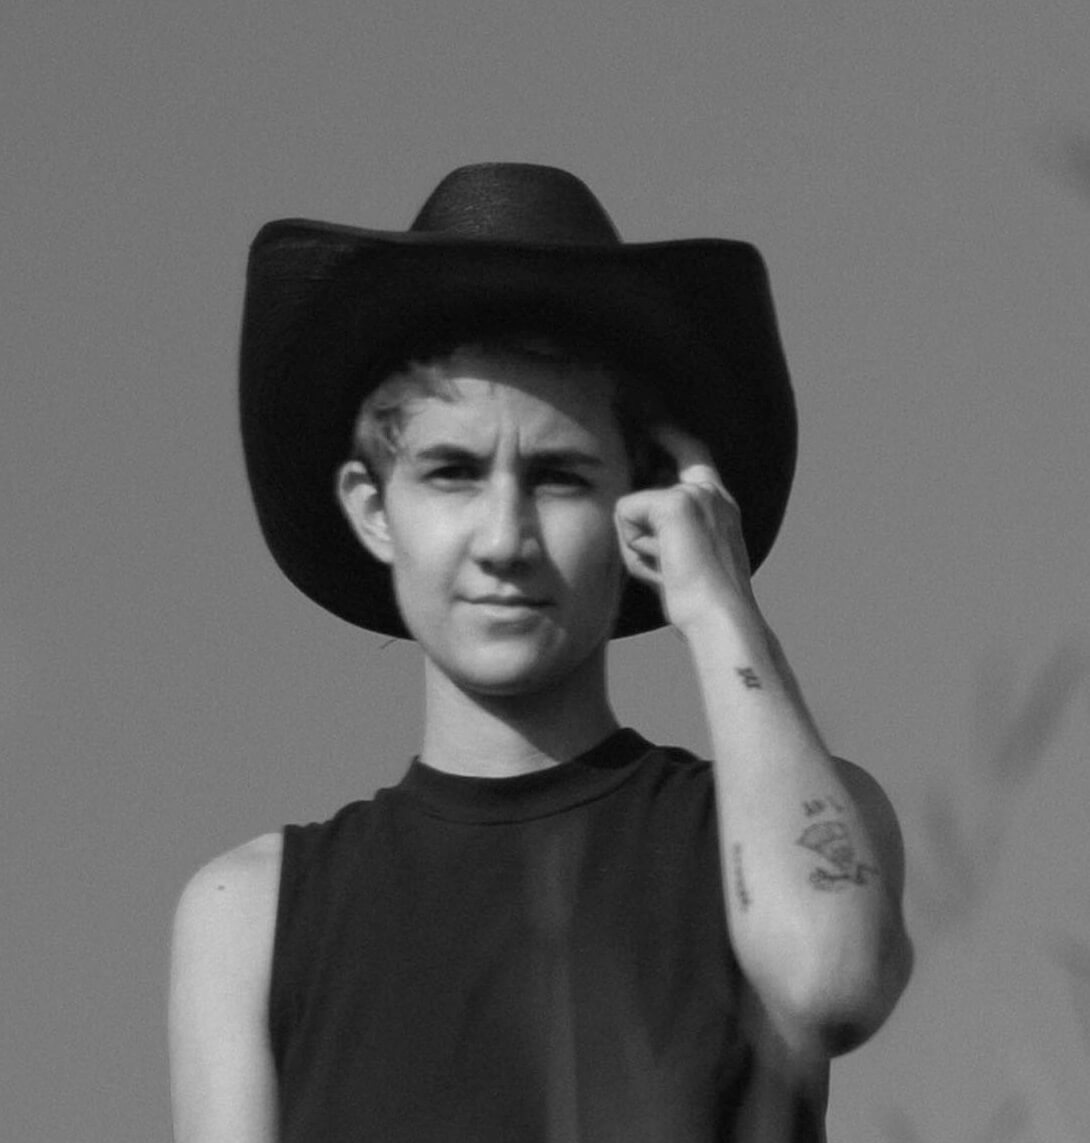 Portrait of Ana Rodriguez, wearing a sleeveless shirt, cowboy hat and touching the left side of her head with a finger